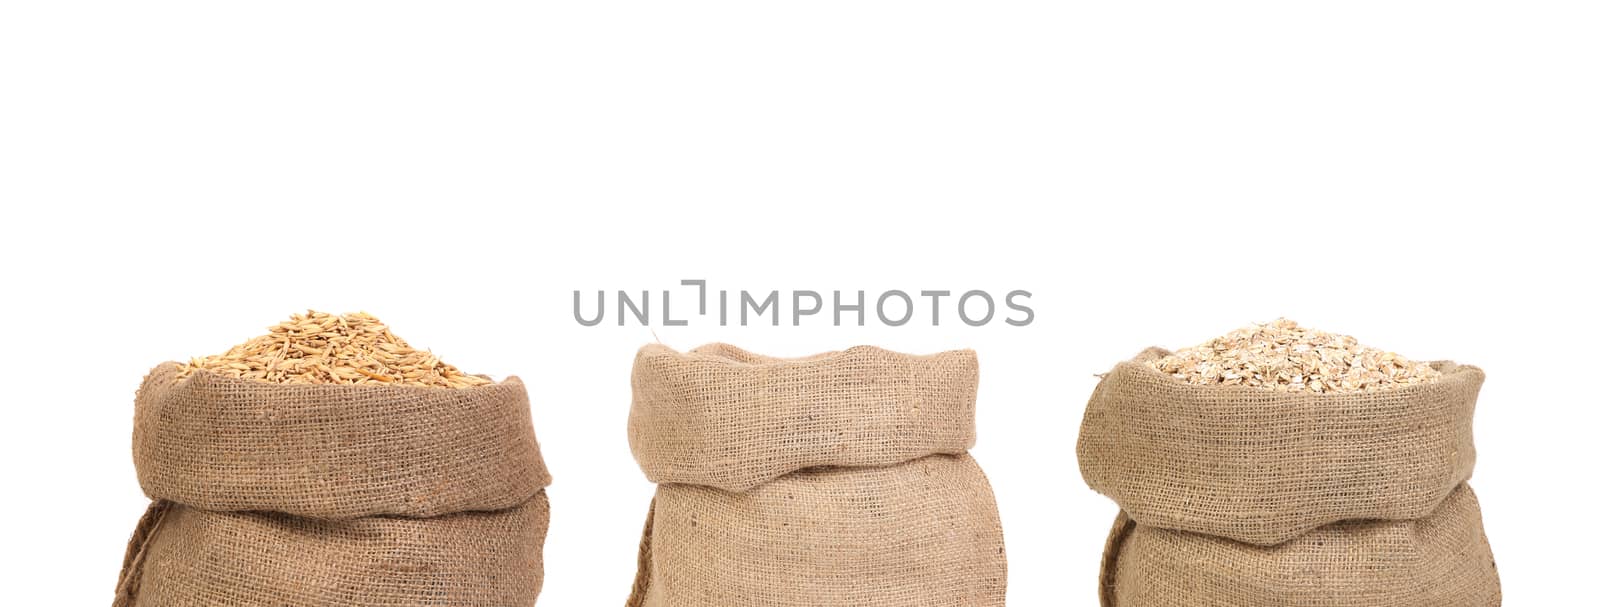 Three bags of cereals. Isolated on a white background